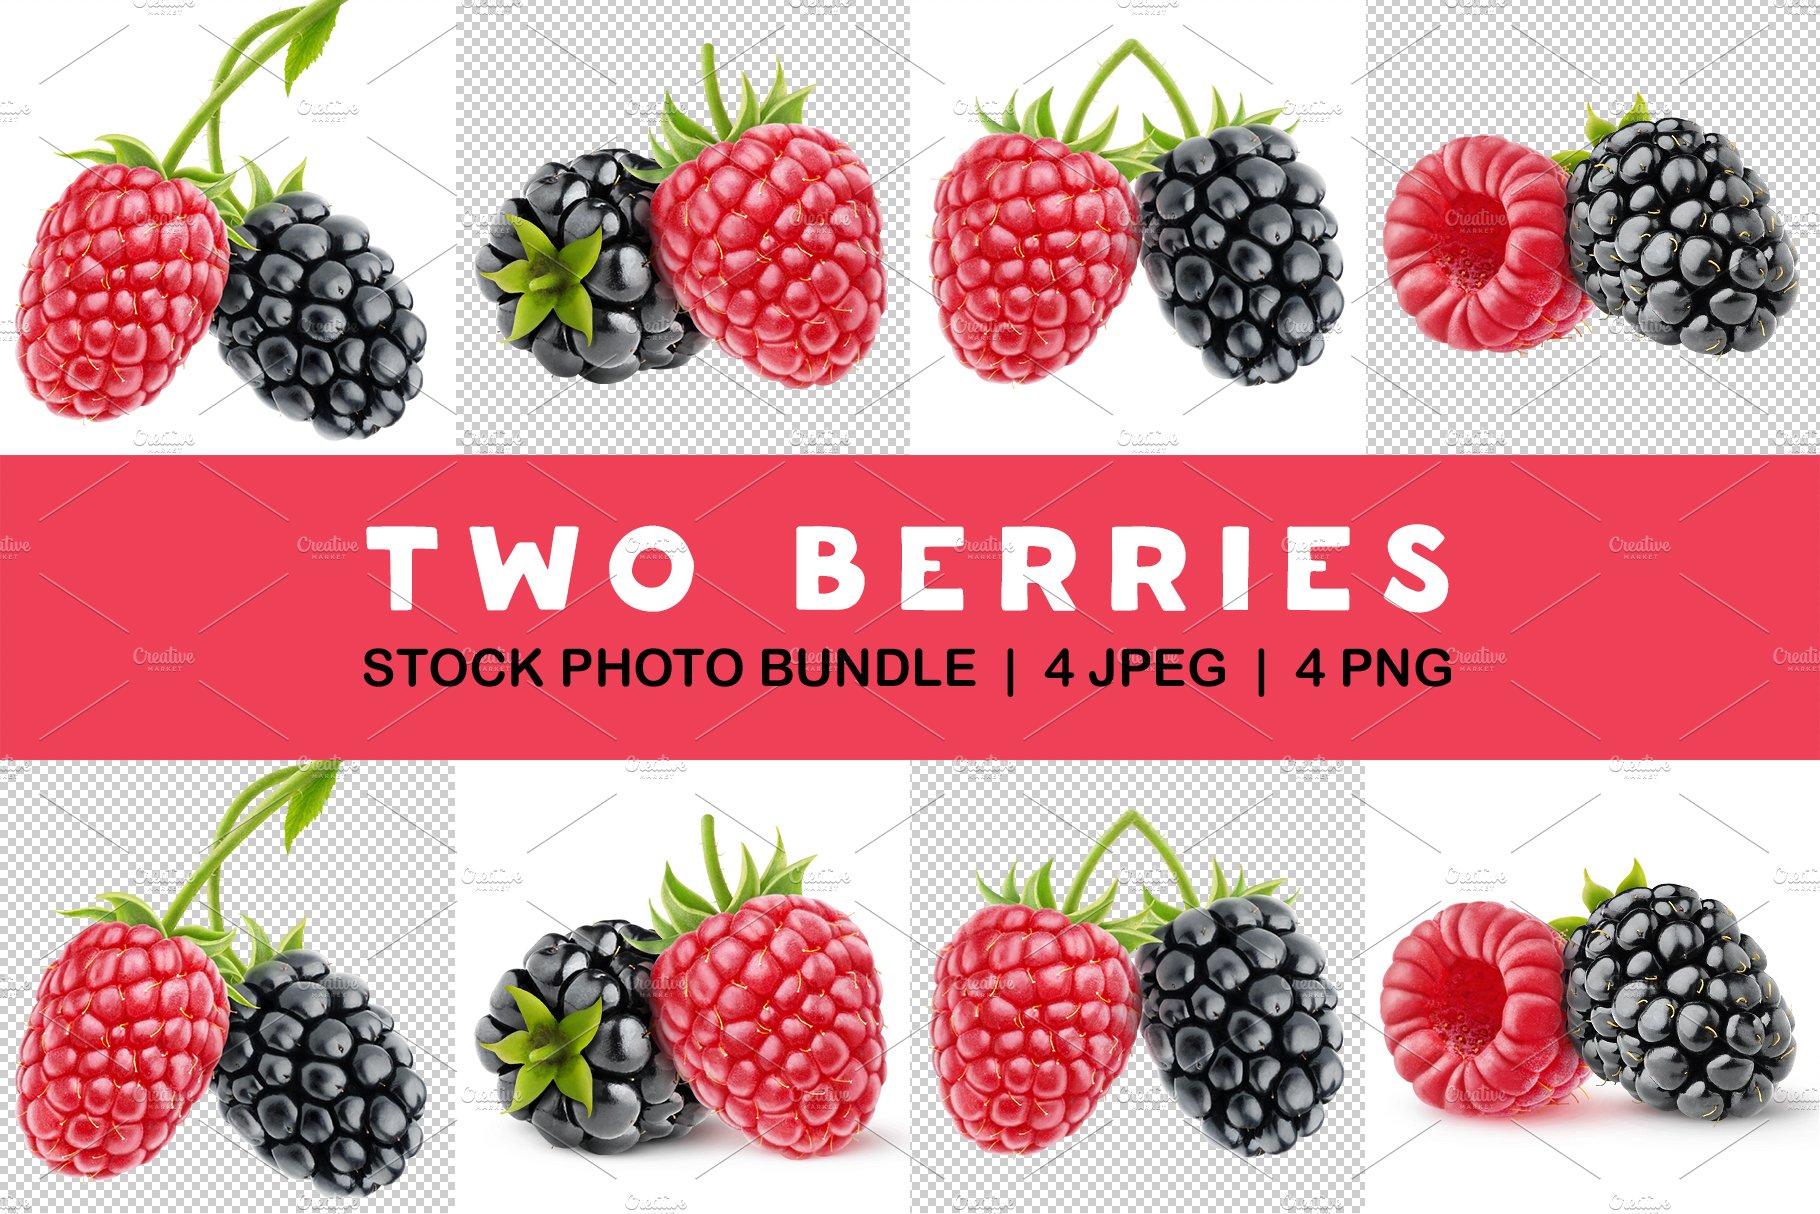 Blackberry and raspberry cover image.